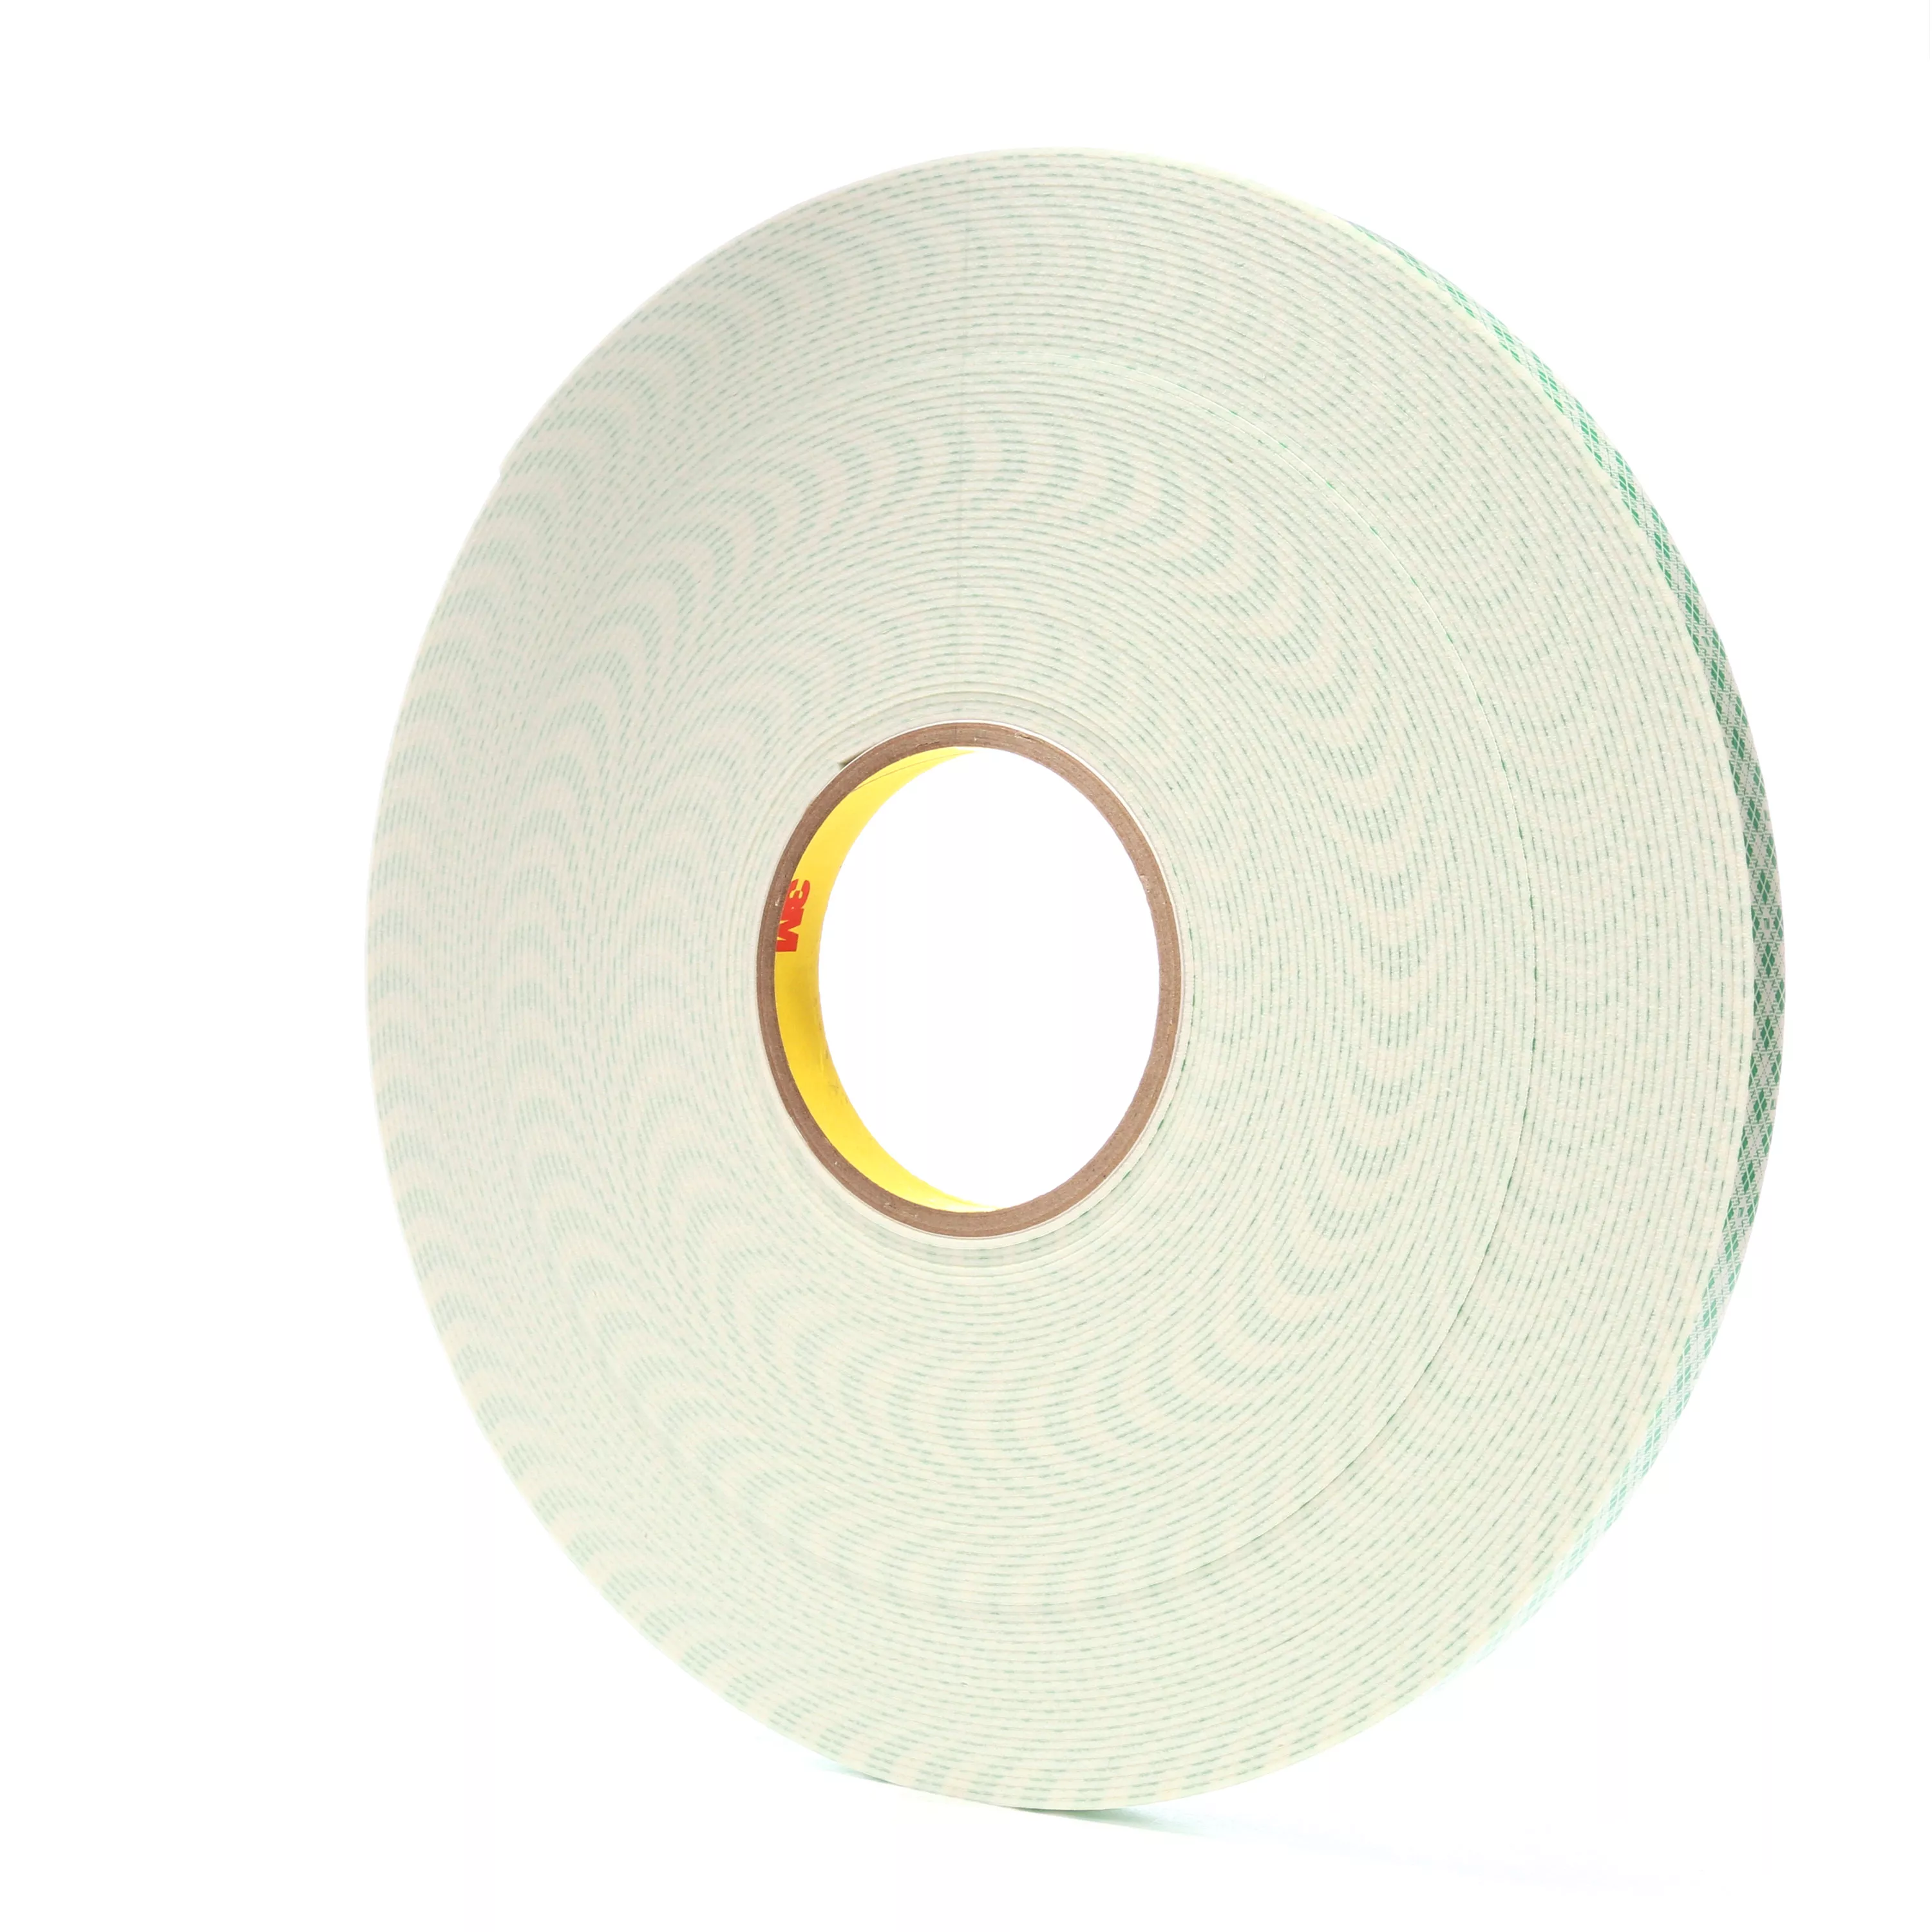 3M™ Double Coated Urethane Foam Tape 4026, Natural, 1/2 in x 36 yd, 62
mil, 18 Rolls/Case